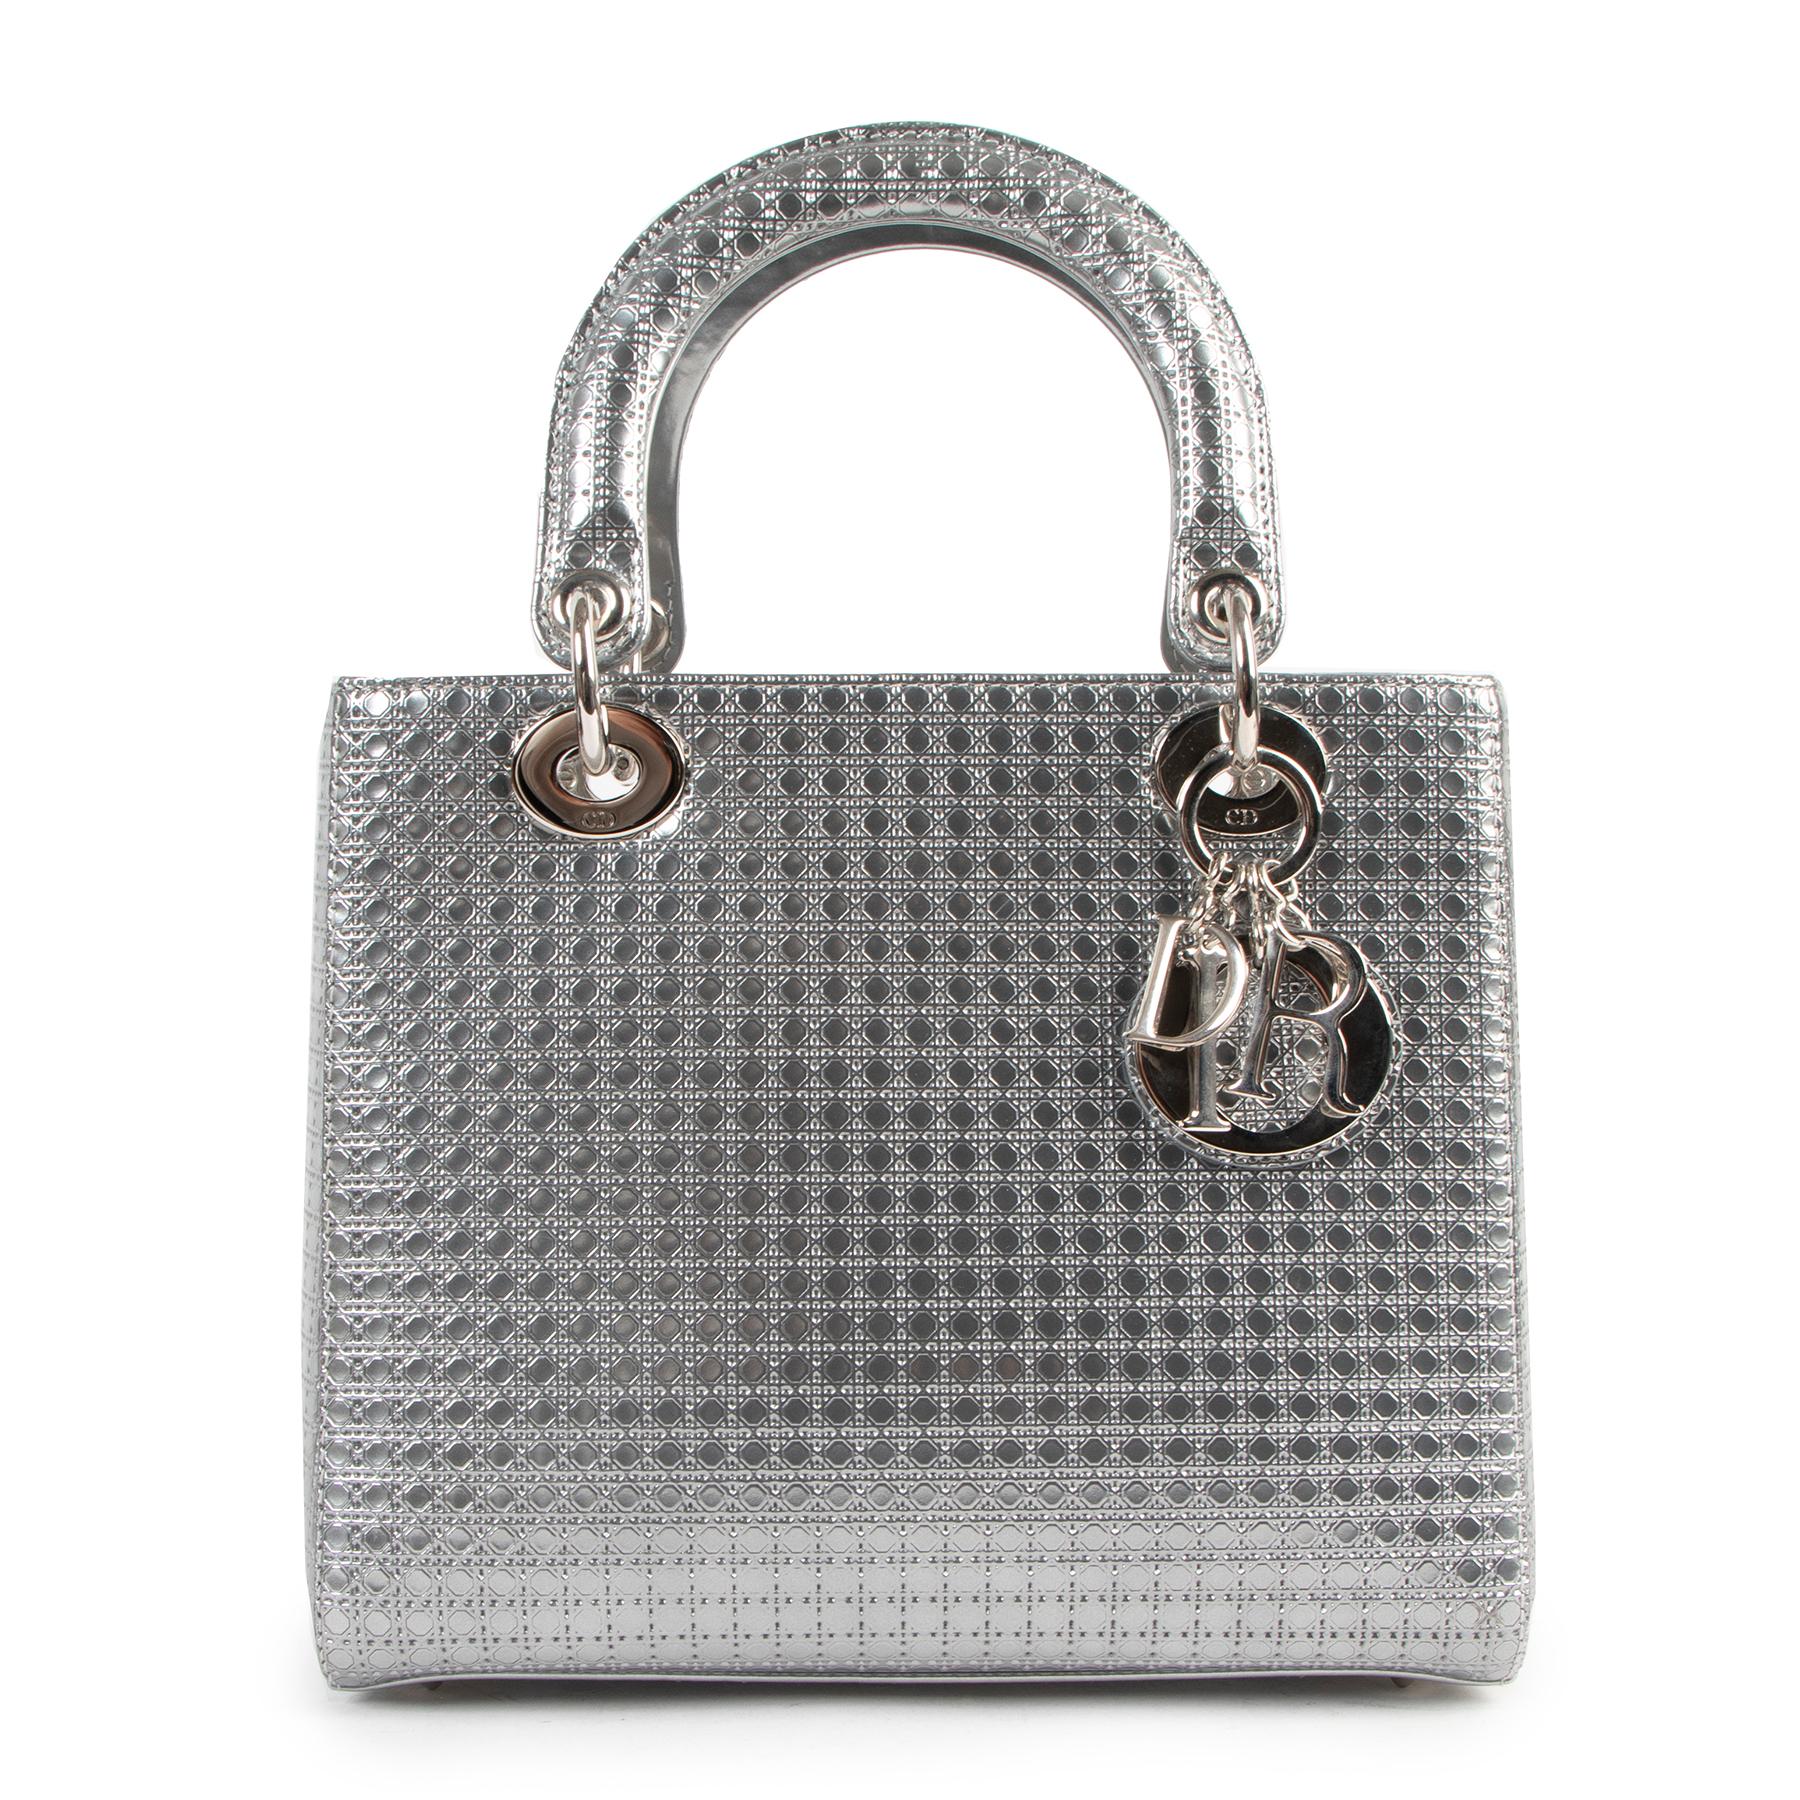 Christian Dior Lady Dior Medium Silver Micro Cannage Bag

The Lady Dior handbag embodies Maison Dior's elegance and beauty.

This sleek and refined style is crafted in silver metallic leather and embossed with Micro Cannage pattern for evening